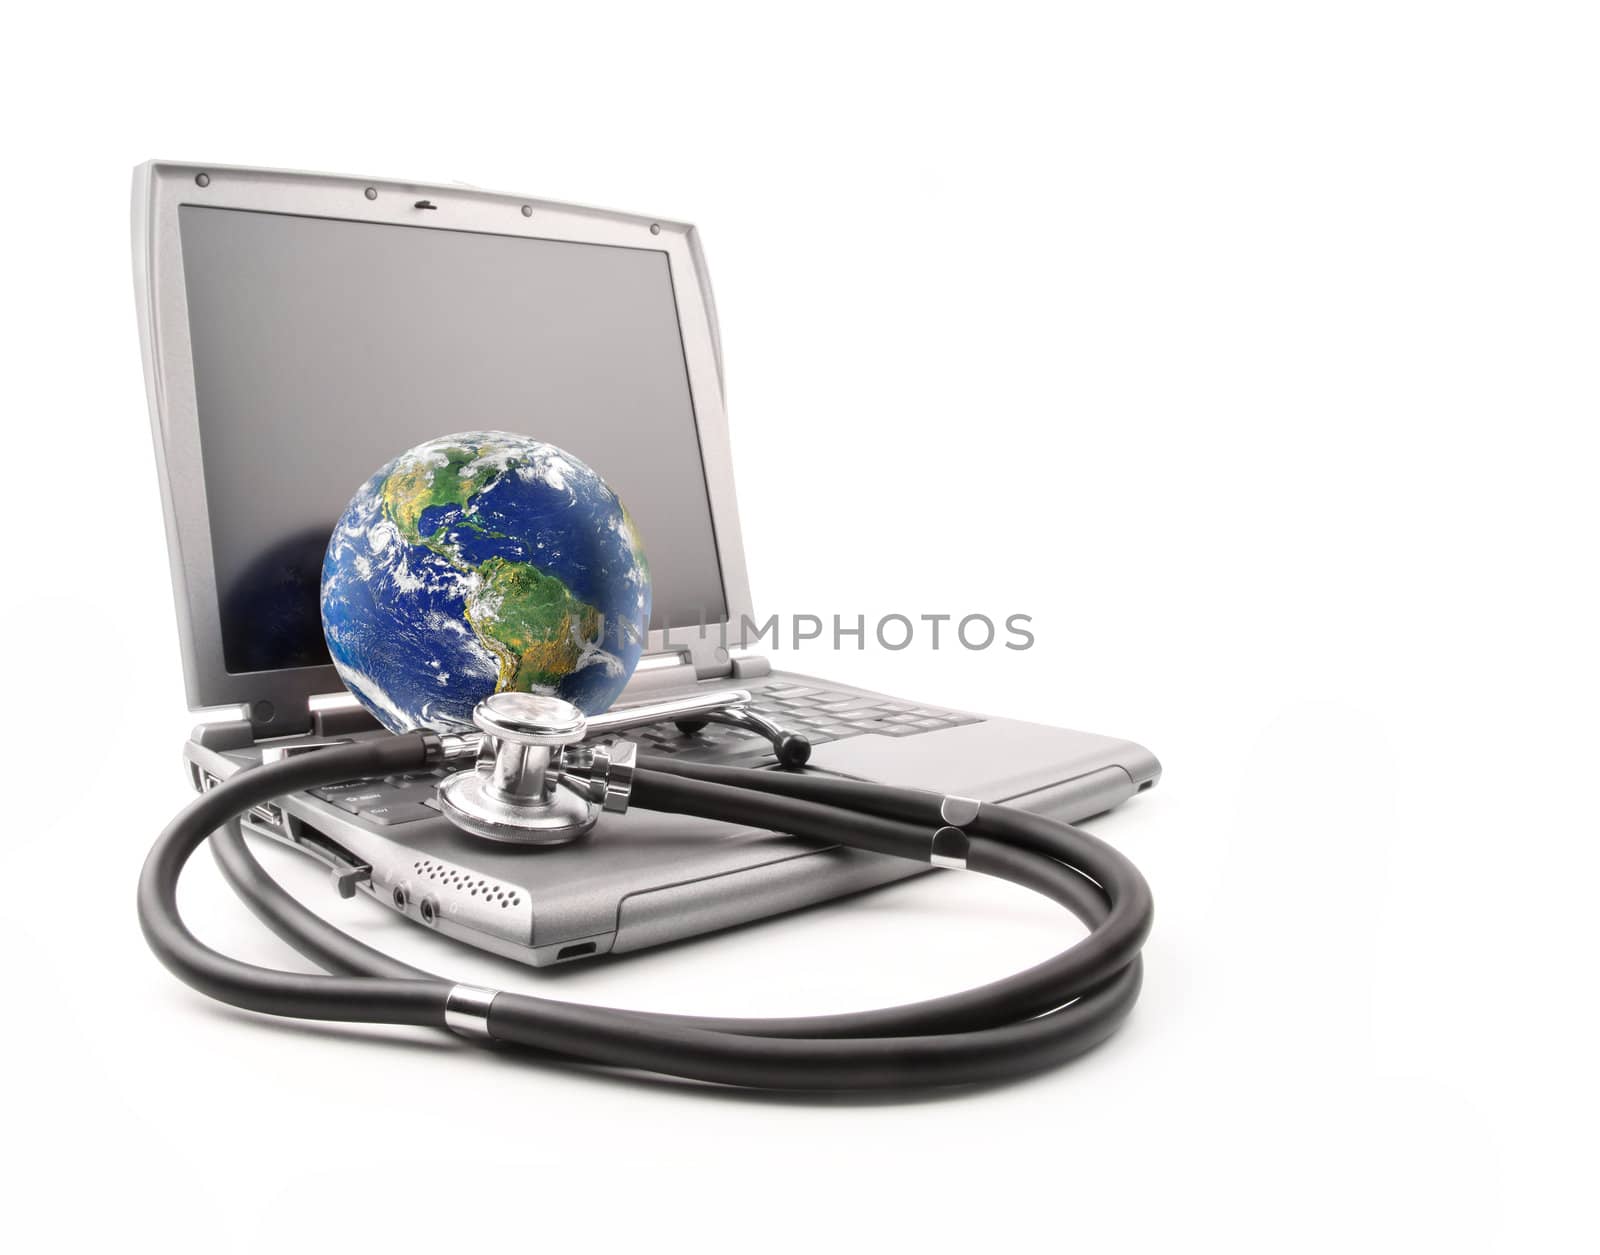 Stethoscope on laptop keyboard with earth on white by Sandralise